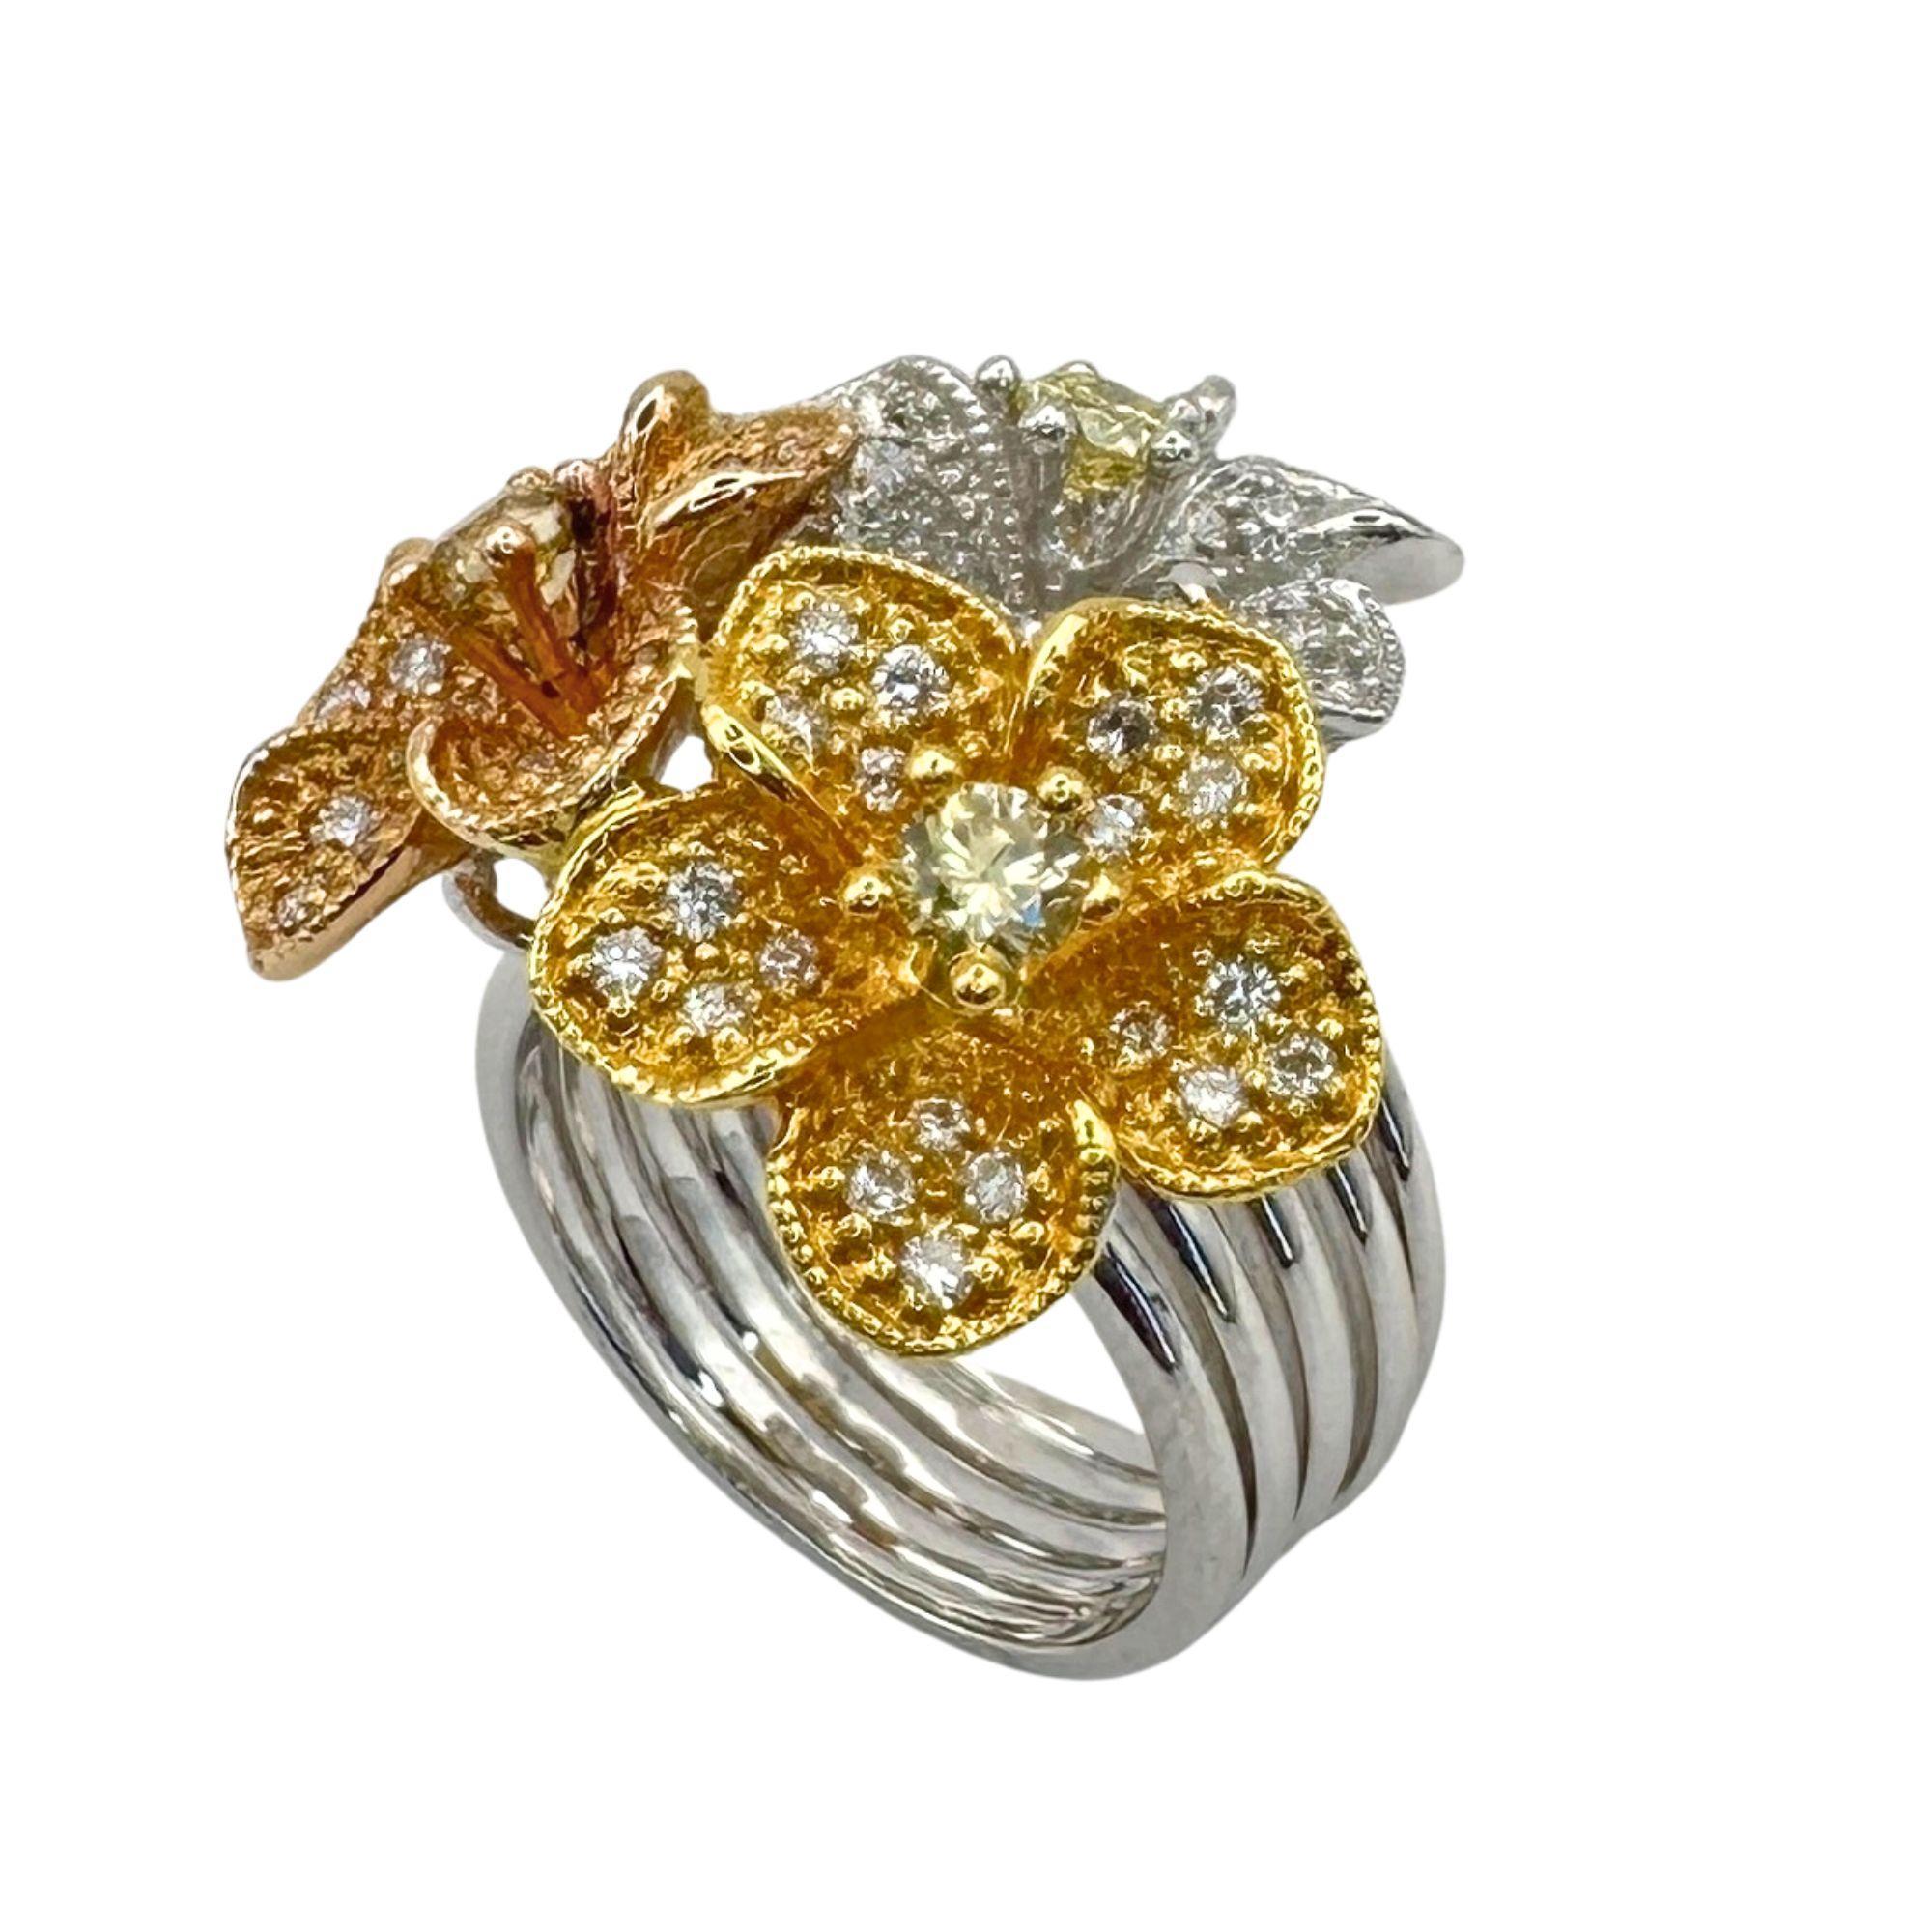 Add some glamour with our Multi-Toned 18k Diamond Floral Ring! With sparkling 1.31 carat diamonds and a weight of 15.7 grams, this ring is sure to make a unique and dazzling statement. Size 6.5, markings 